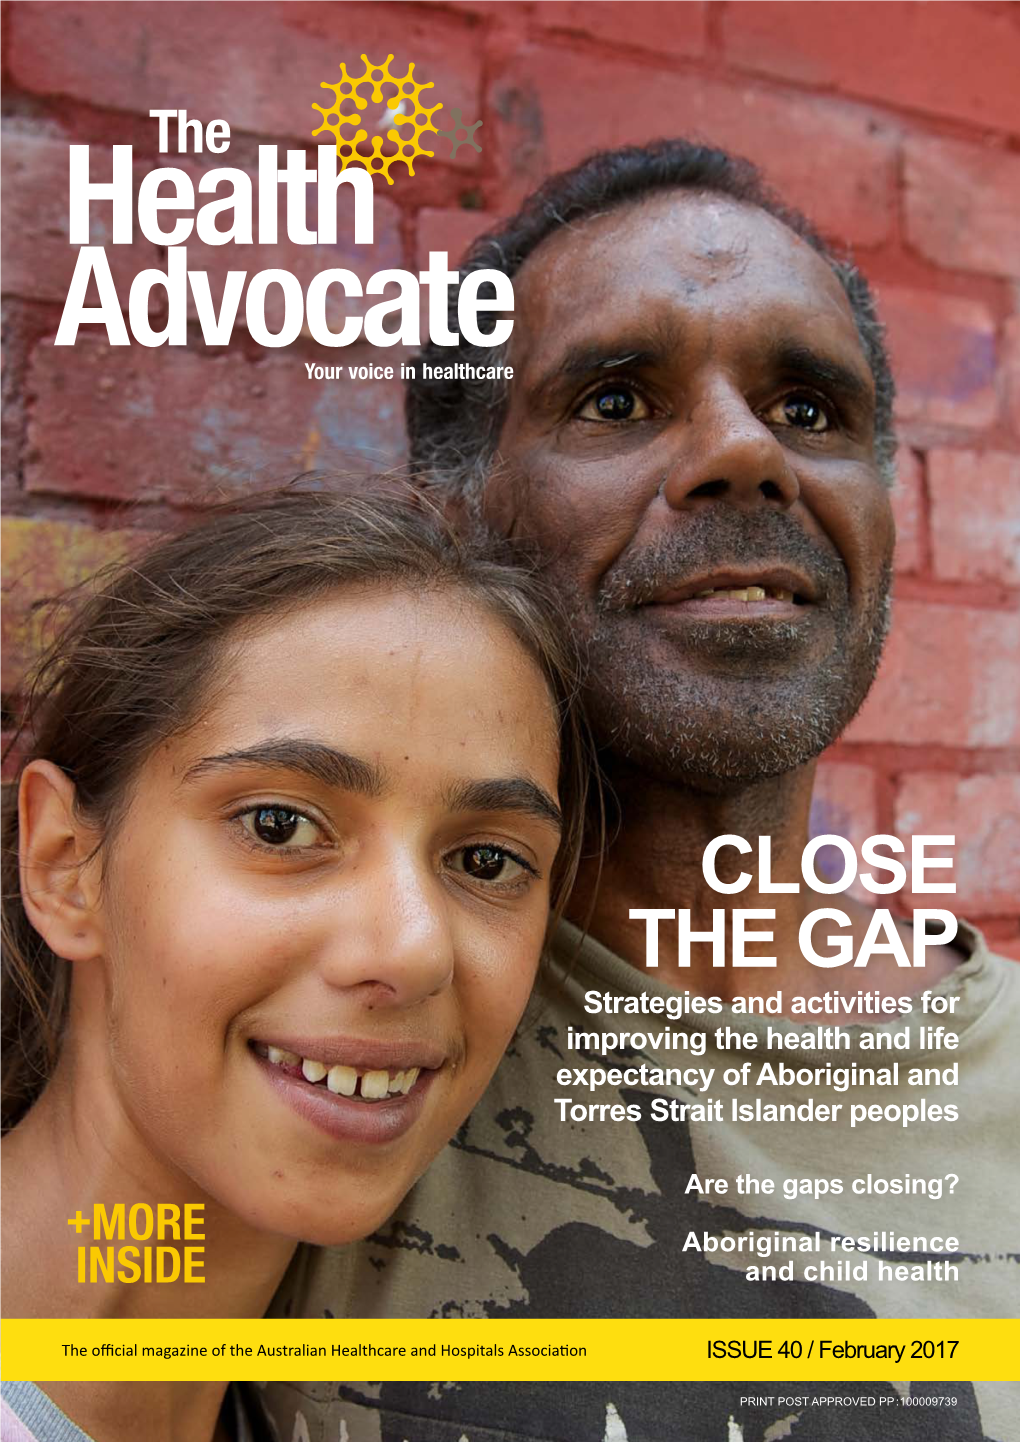 CLOSE the GAP Strategies and Activities for Improving the Health and Life Expectancy of Aboriginal and Torres Strait Islander Peoples